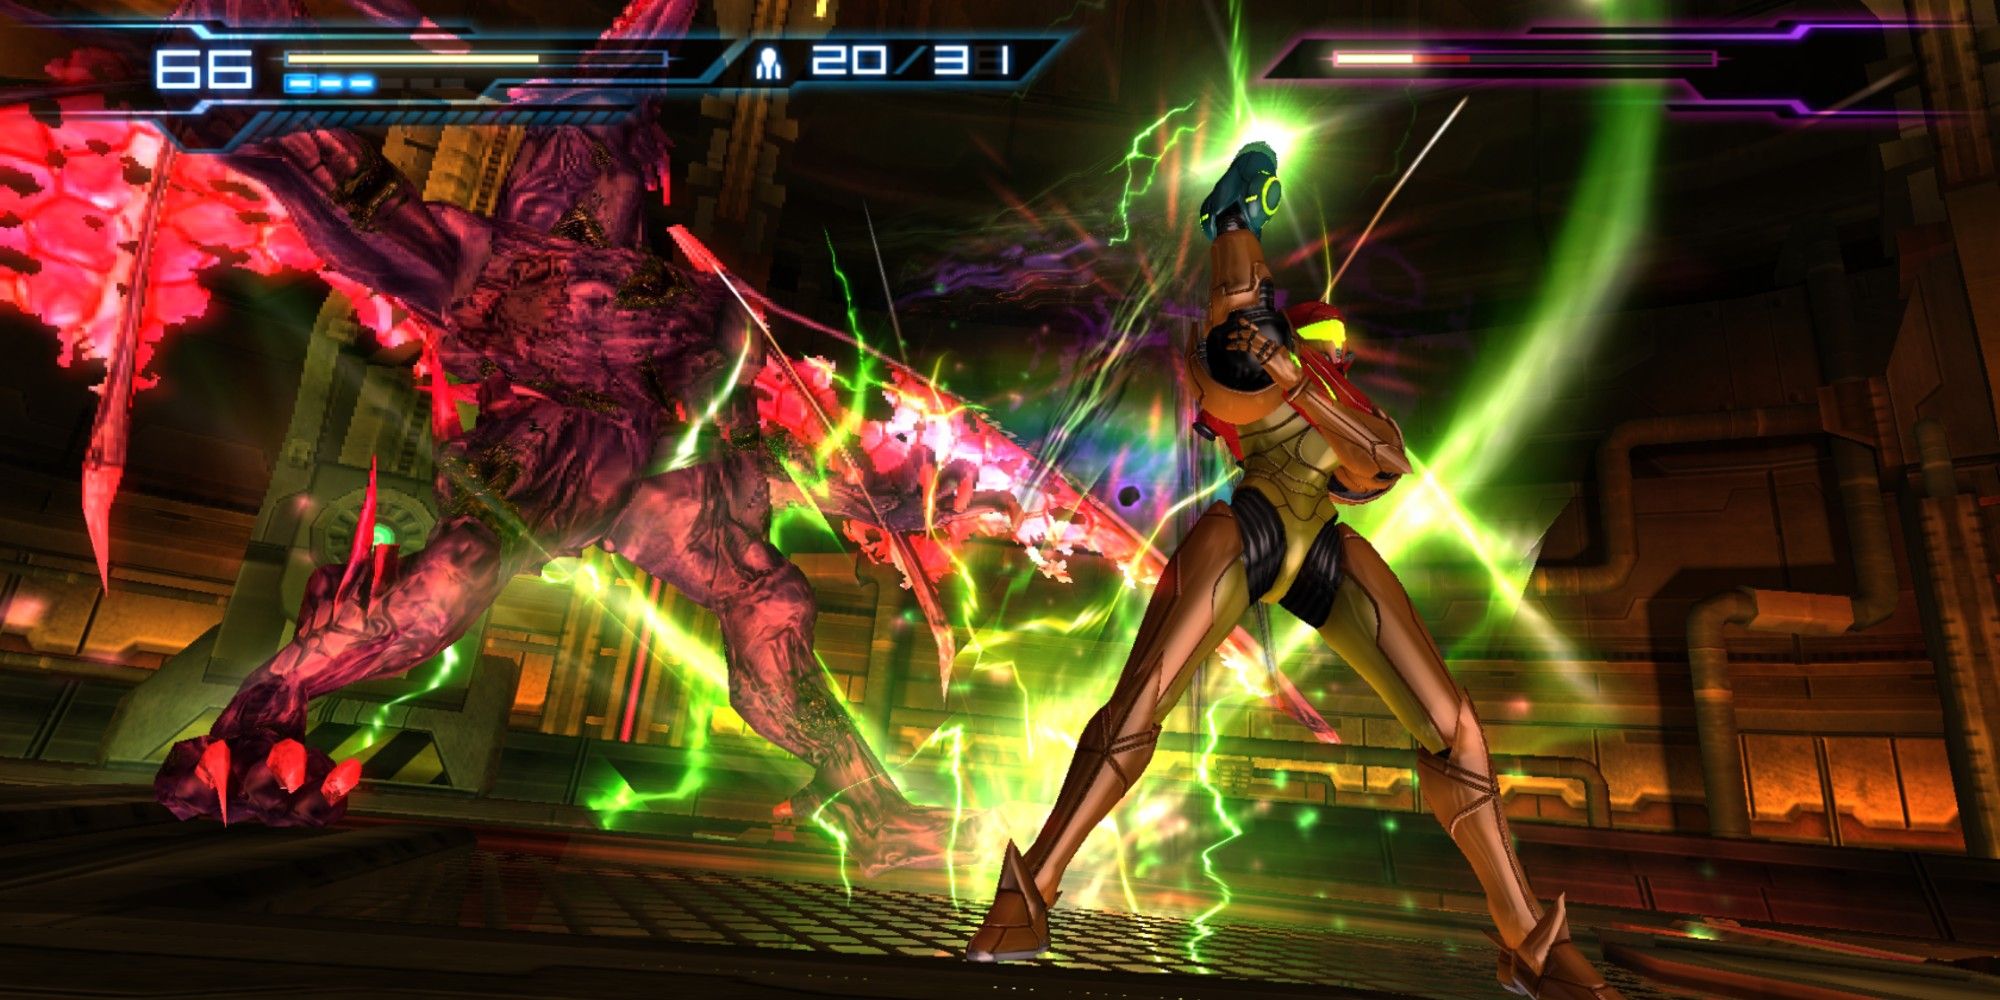 Samus performs melee attacks on aliens in Metroid: Other M